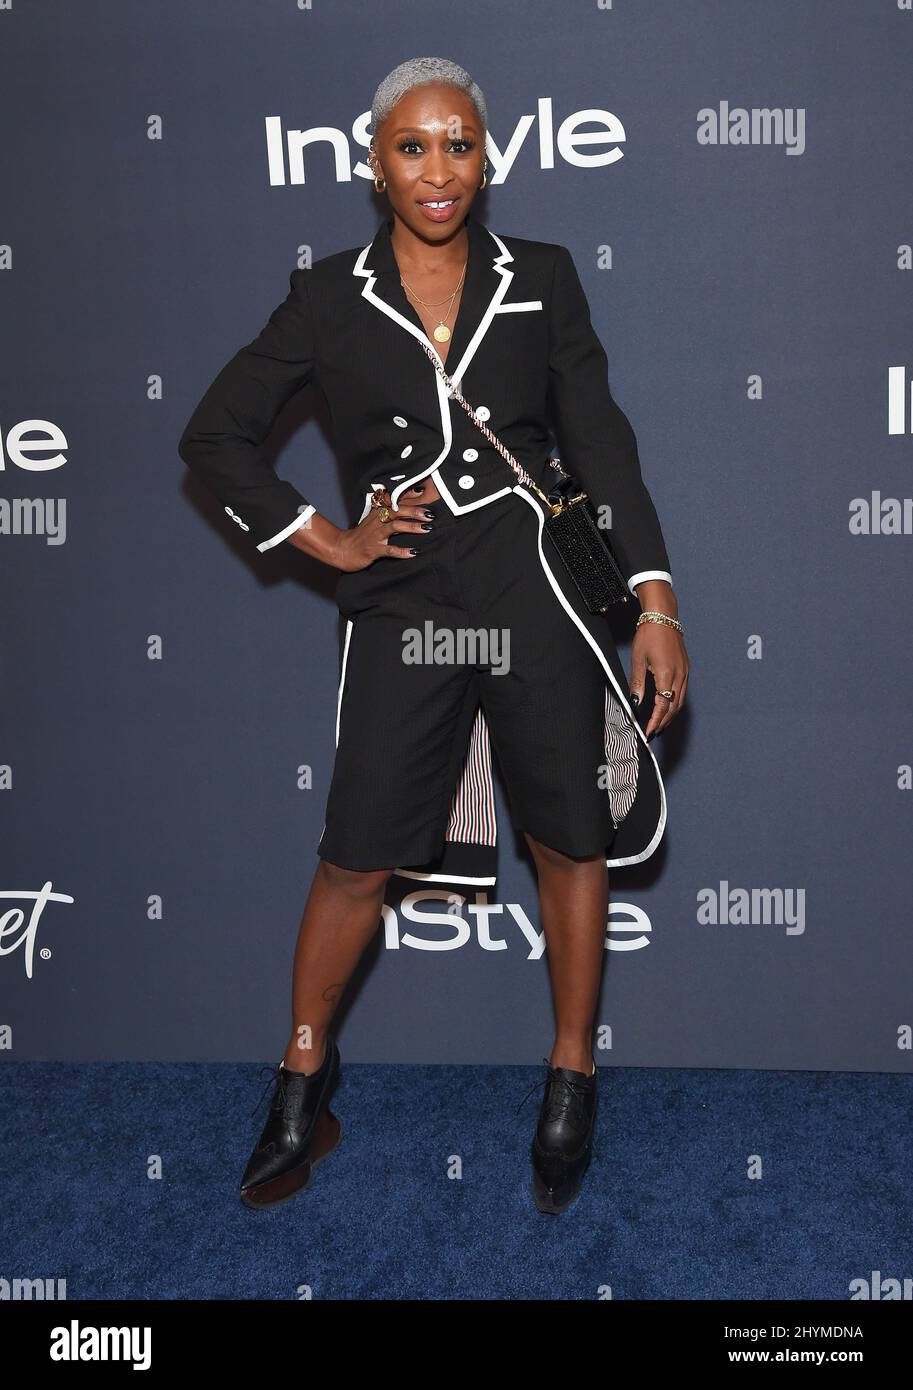 Cynthia Erivo at the Instyle and Warner Bros Golden Globes After Party held at the Beverly Hilton Hotel on January 5, 2020 in Beverly Hills, CA. Stock Photo